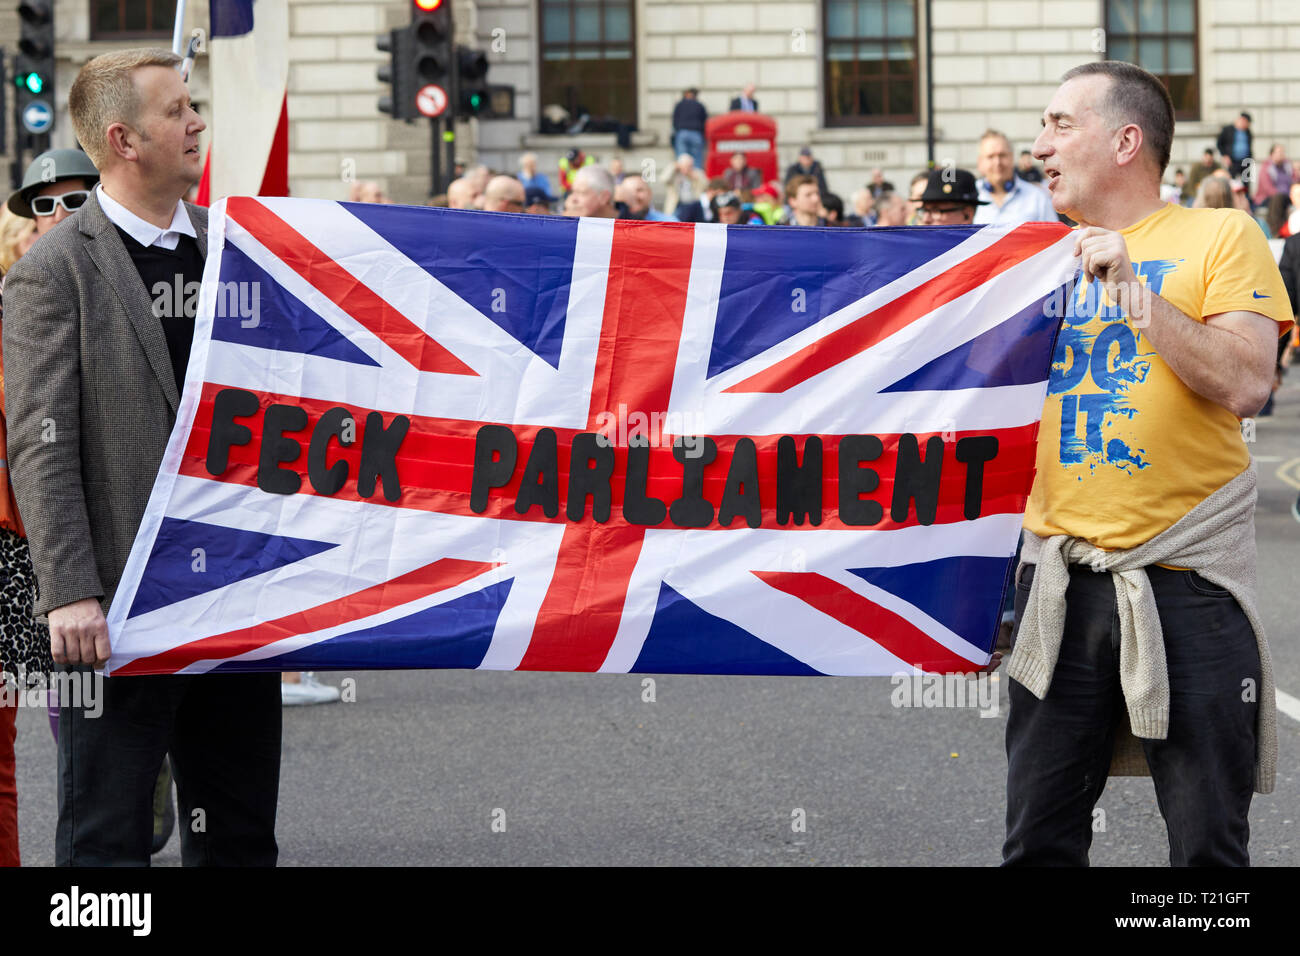 London, UK. - March 29, 2019: A flag and message held at a demonstration in Parliament Square on the day the UK should have left the EU. Credit: Kevin J. Frost/Alamy Live News Stock Photo